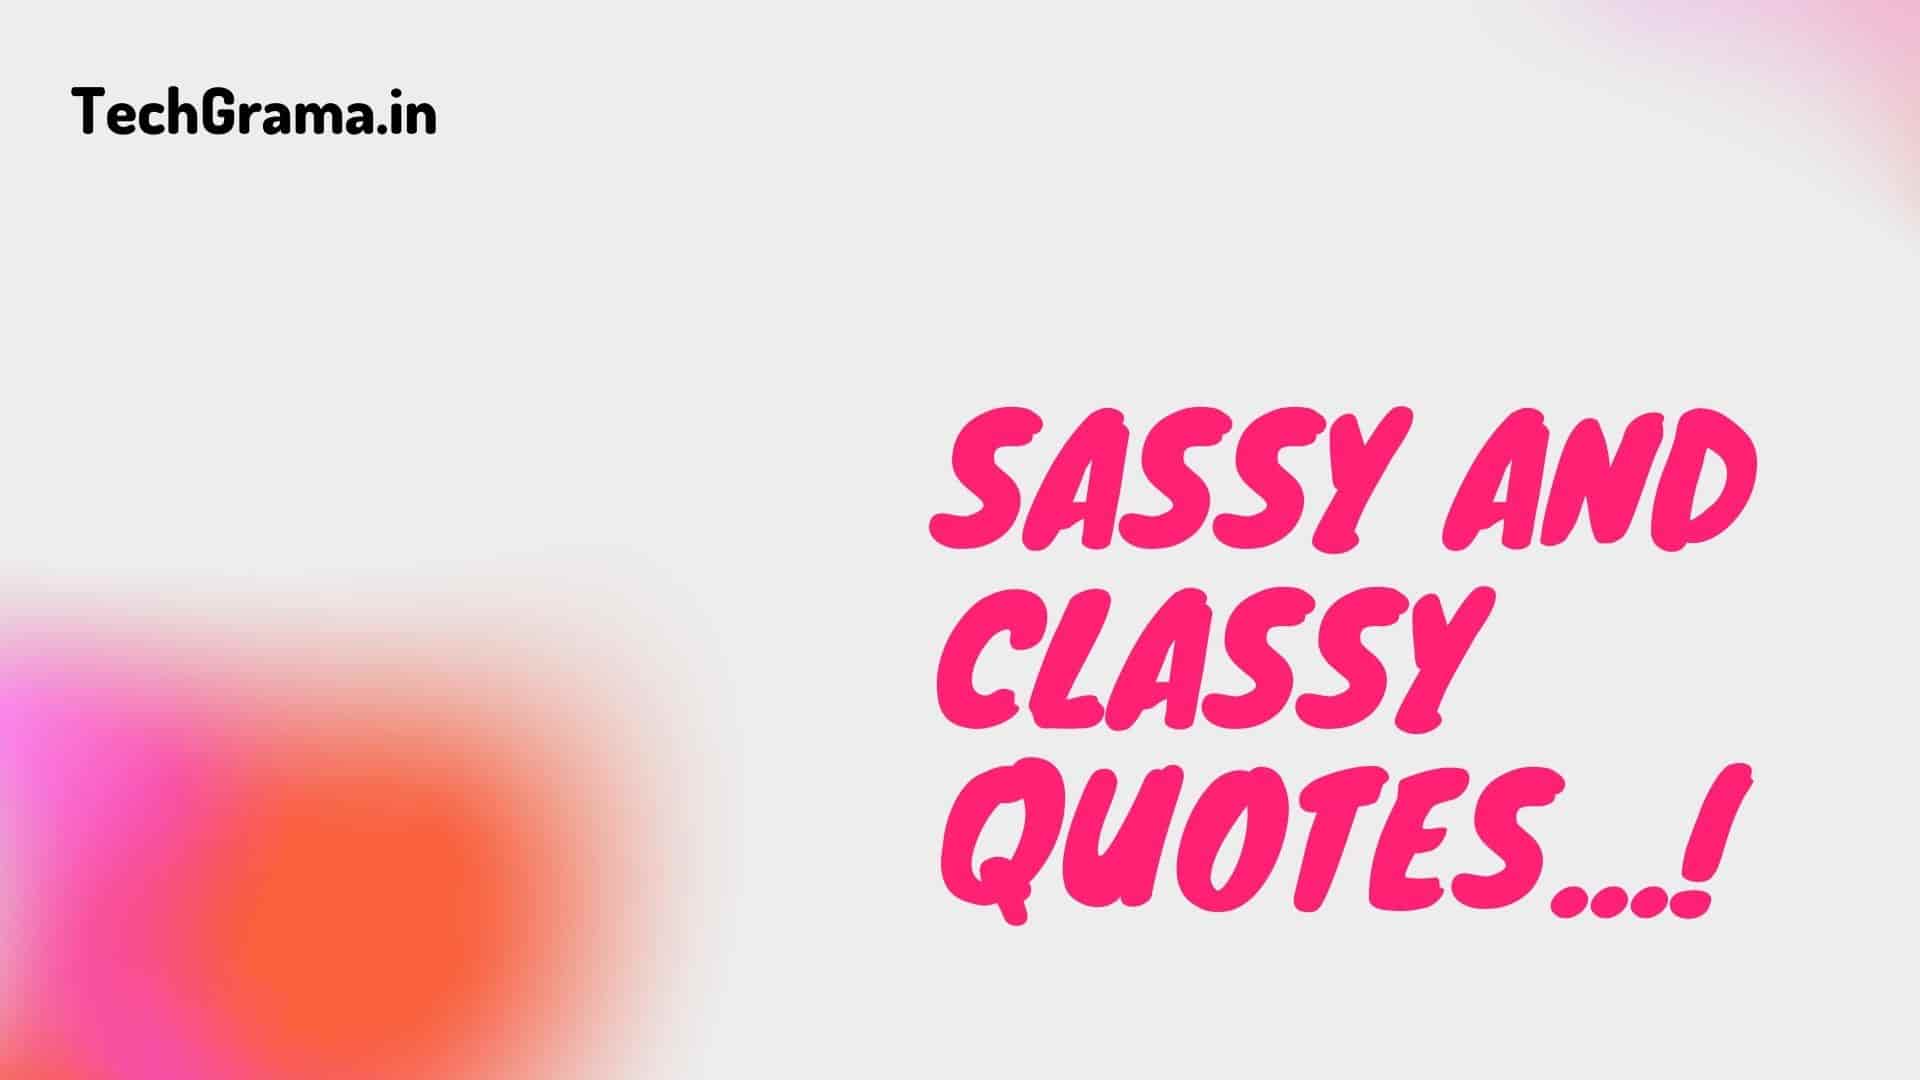 Best Classy Quotes For Girls, Classy Queen Quotes, Classy Girl Quotes, Classy Women Quotes, Sassy and Classy Quotes, Classy Girly Quotes, Classy Elegance Quotes, Quotes on Dressing Classy, Classy Quotes For Instagram, Classy Girl Quotes For Instagram, Classy Quotes For Woman, Classy Look Quotes, Classy Lady Quotes, Classy Independent Woman Quotes, Quotes on Classy Attitude, Classy Quotes About Makeup, Classy Beautiful Woman Quotes.